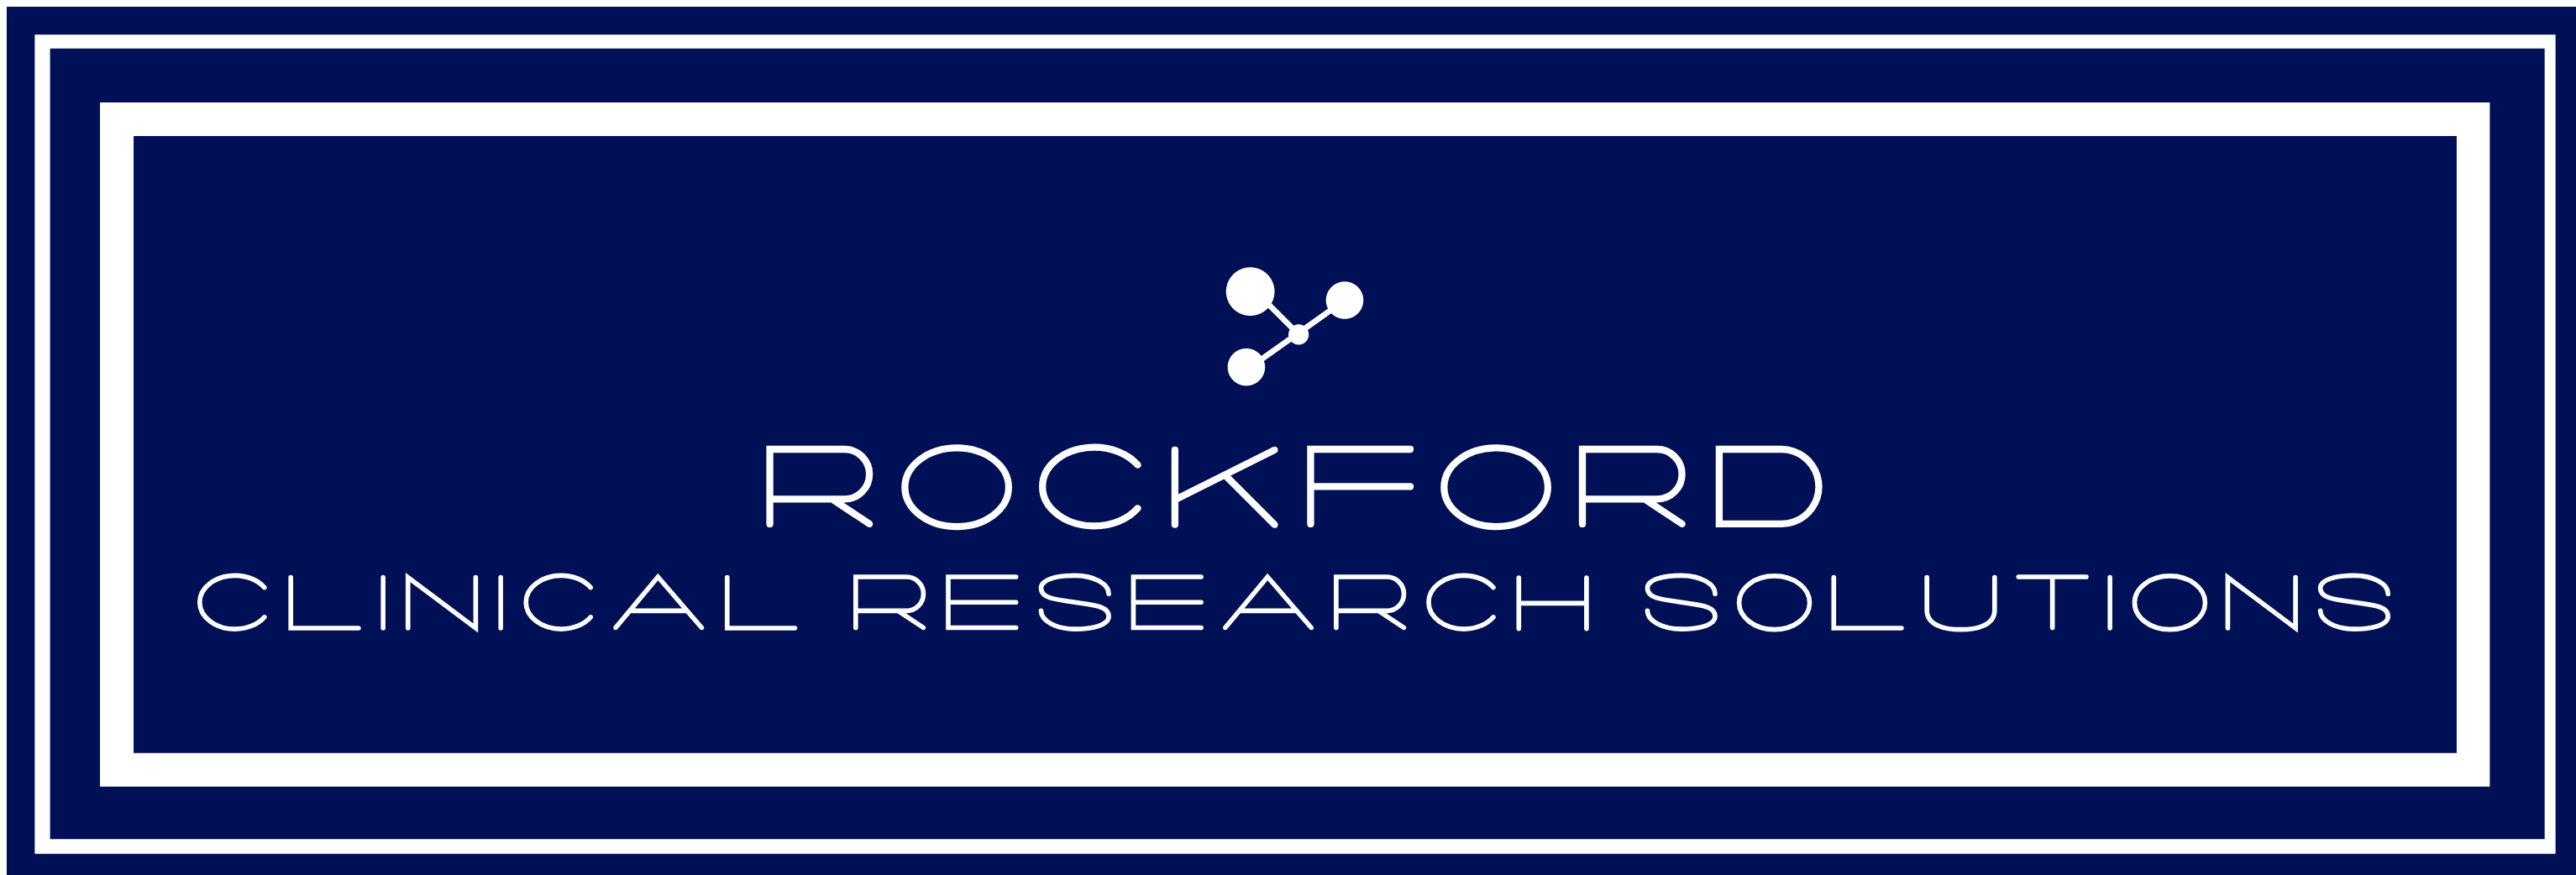 Rockford Clinical Research Solutions - Professional consulting for clinical research sites